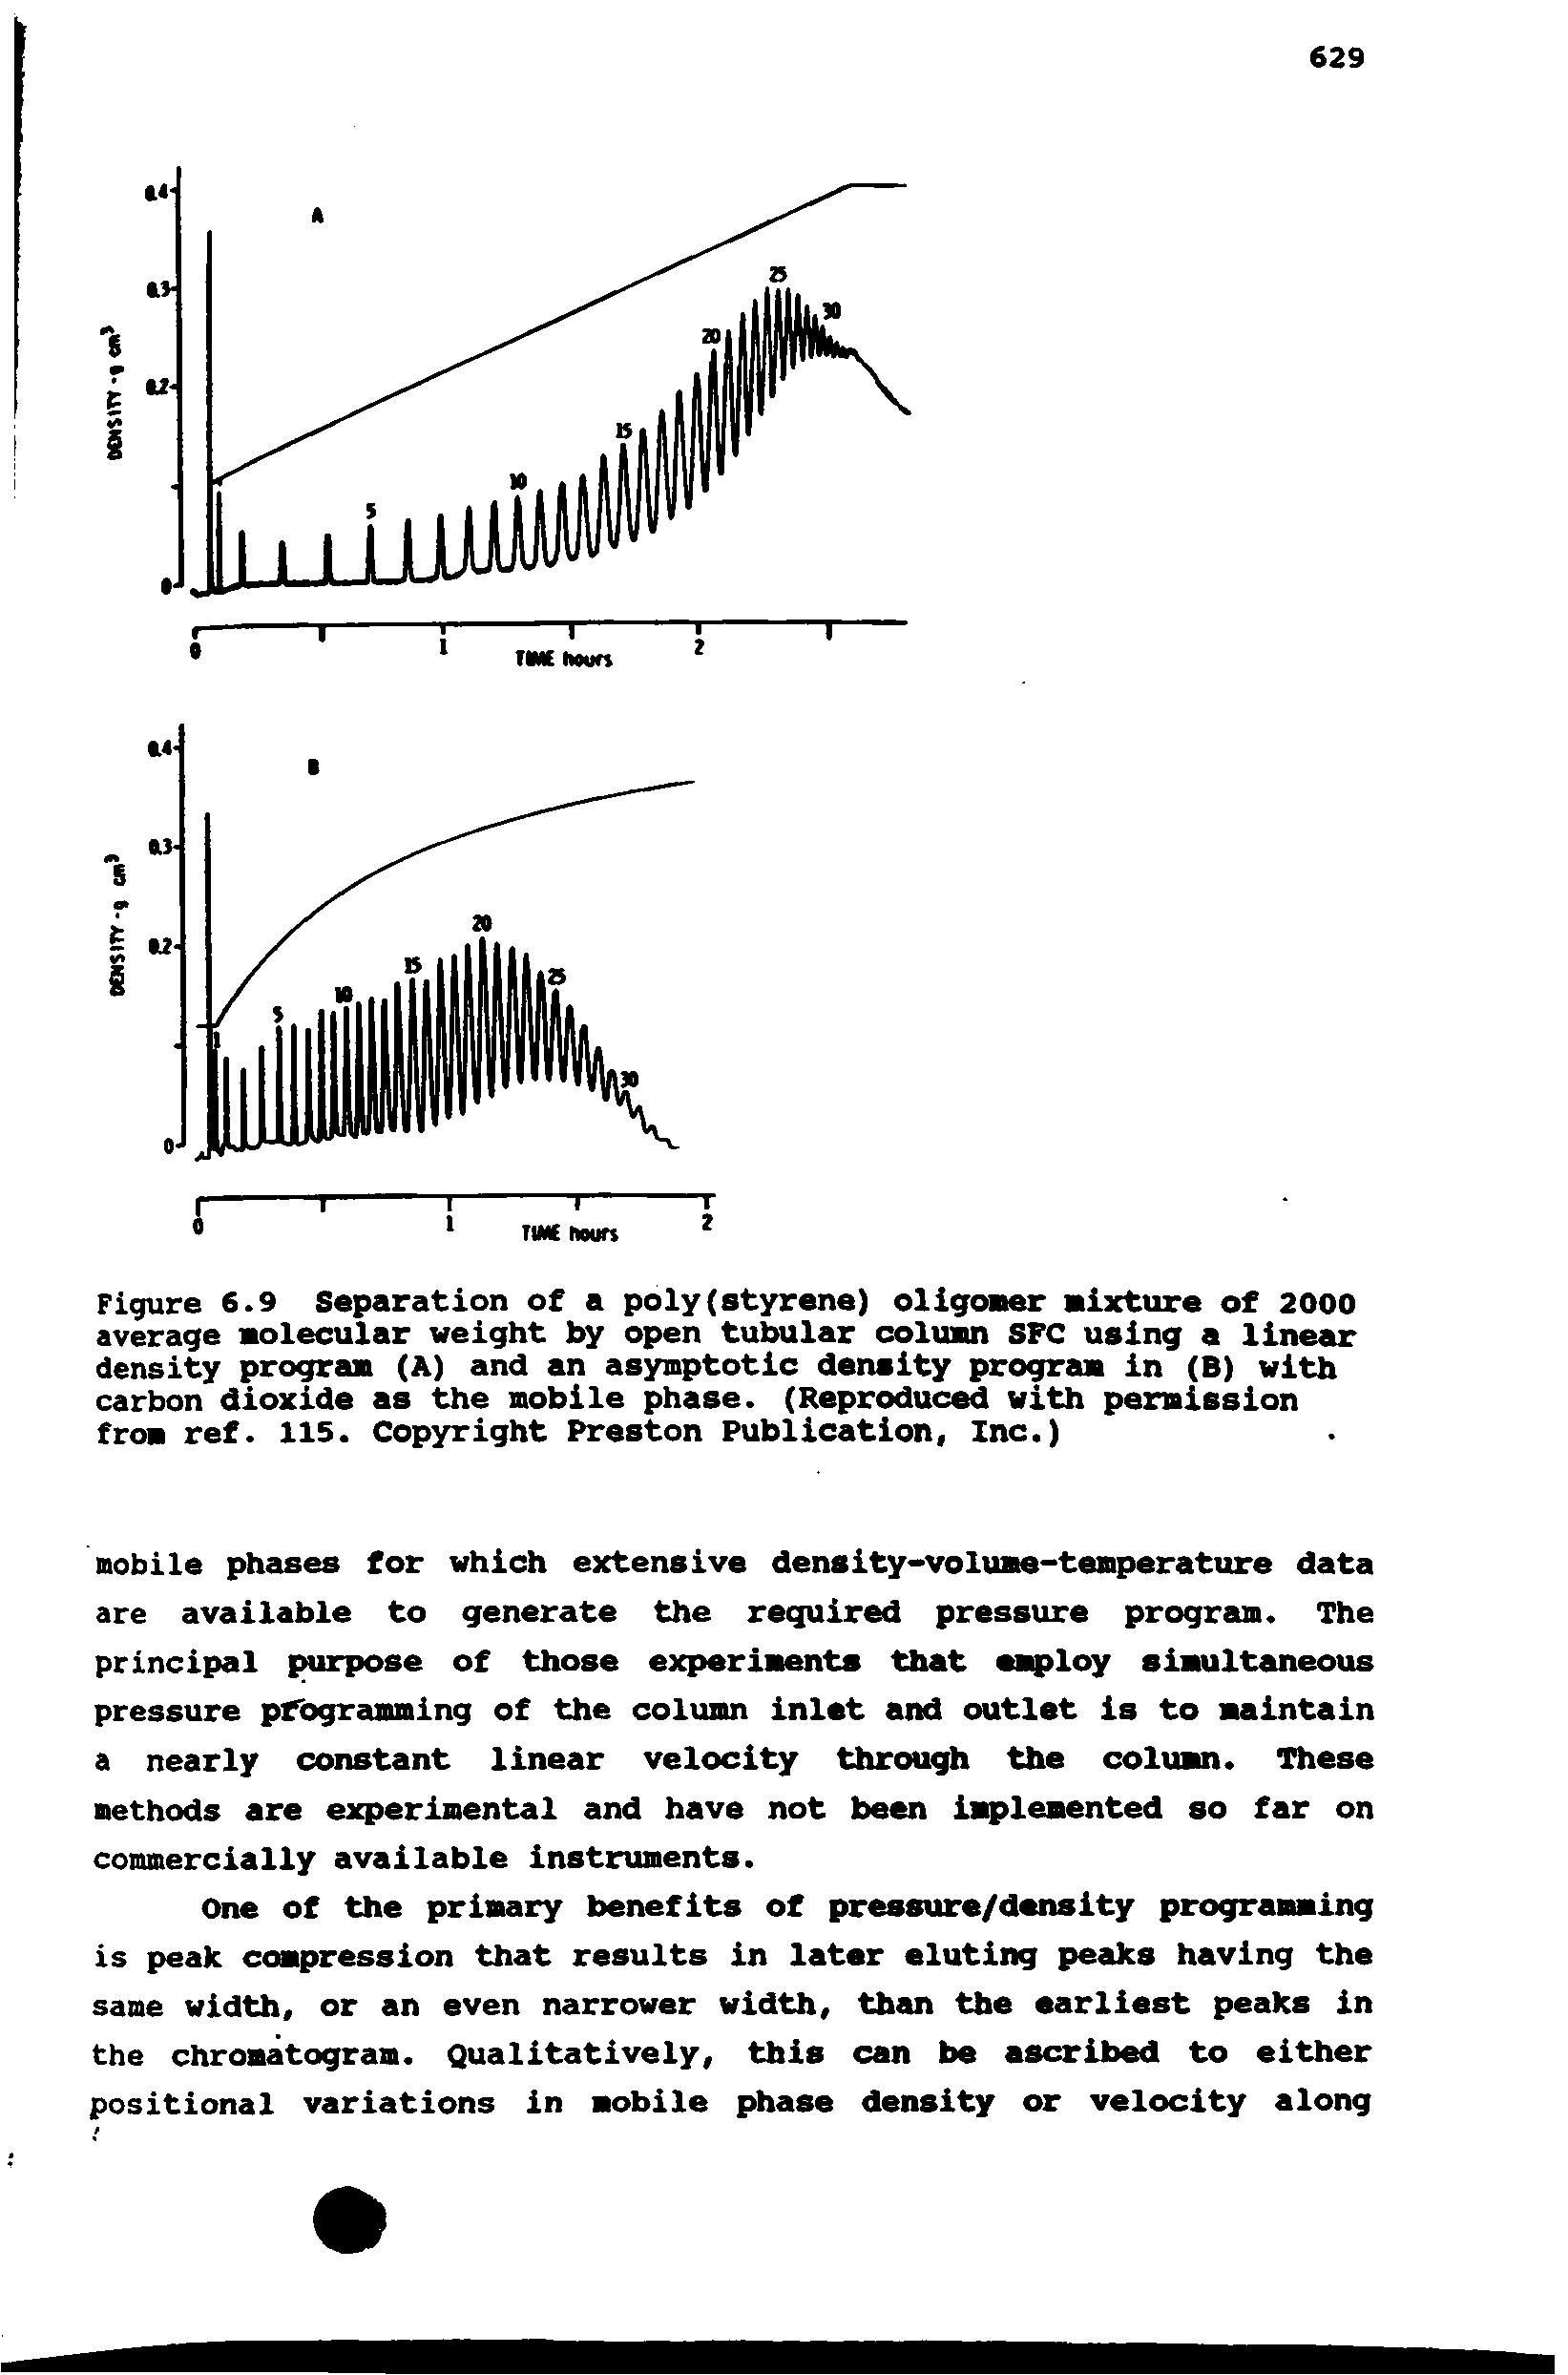 Figure 6.9 Separation of a poly(styrene) oligomer mixture of 2000 average molecular weight by open tubular column SFC using a linear density program (A) and an asymptotic density progreua in (B) with carbon dioxide as the mobile phase. (Reproduced with permission from ref. 115. Copyright Preston Publication, Inc.)...